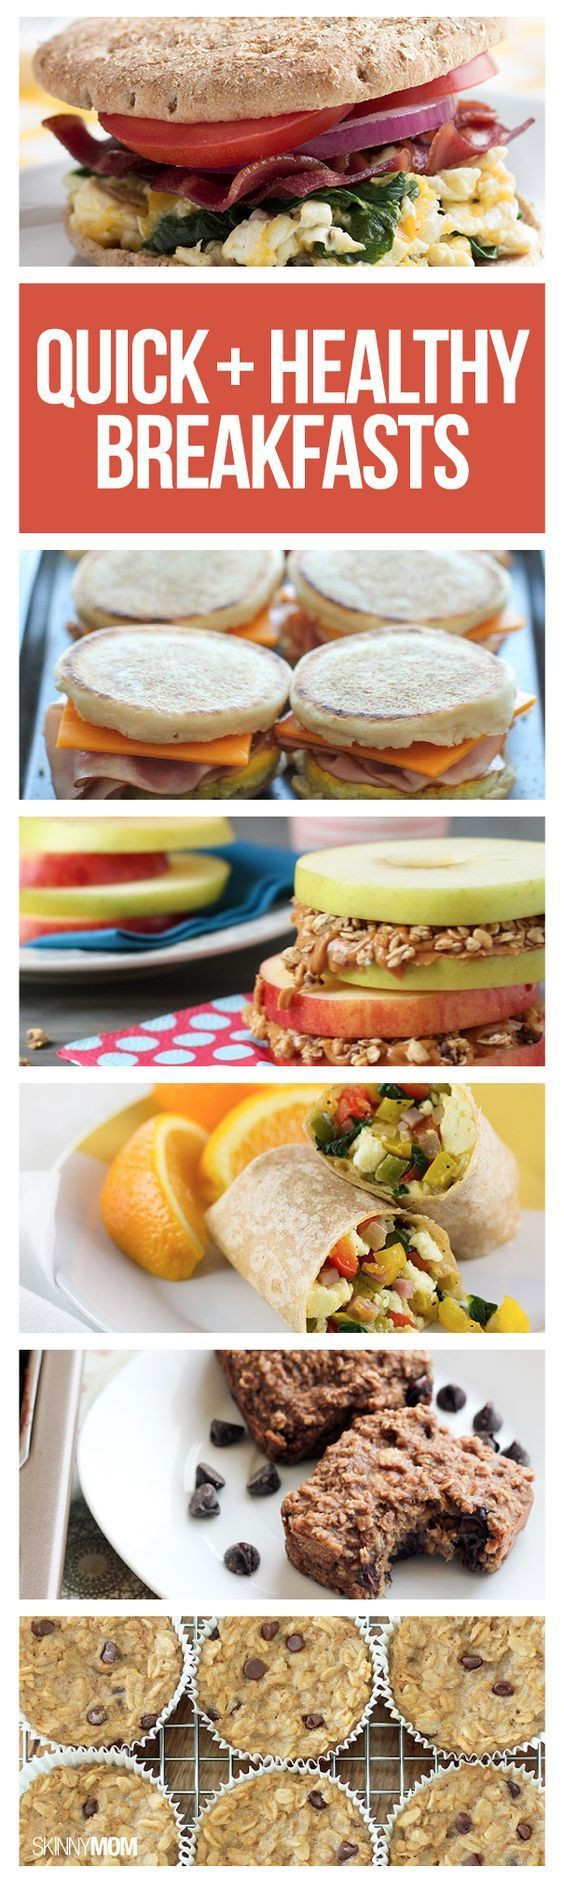 Quick Healthy Breakfast
 17 Best images about Healthy Meals on Pinterest